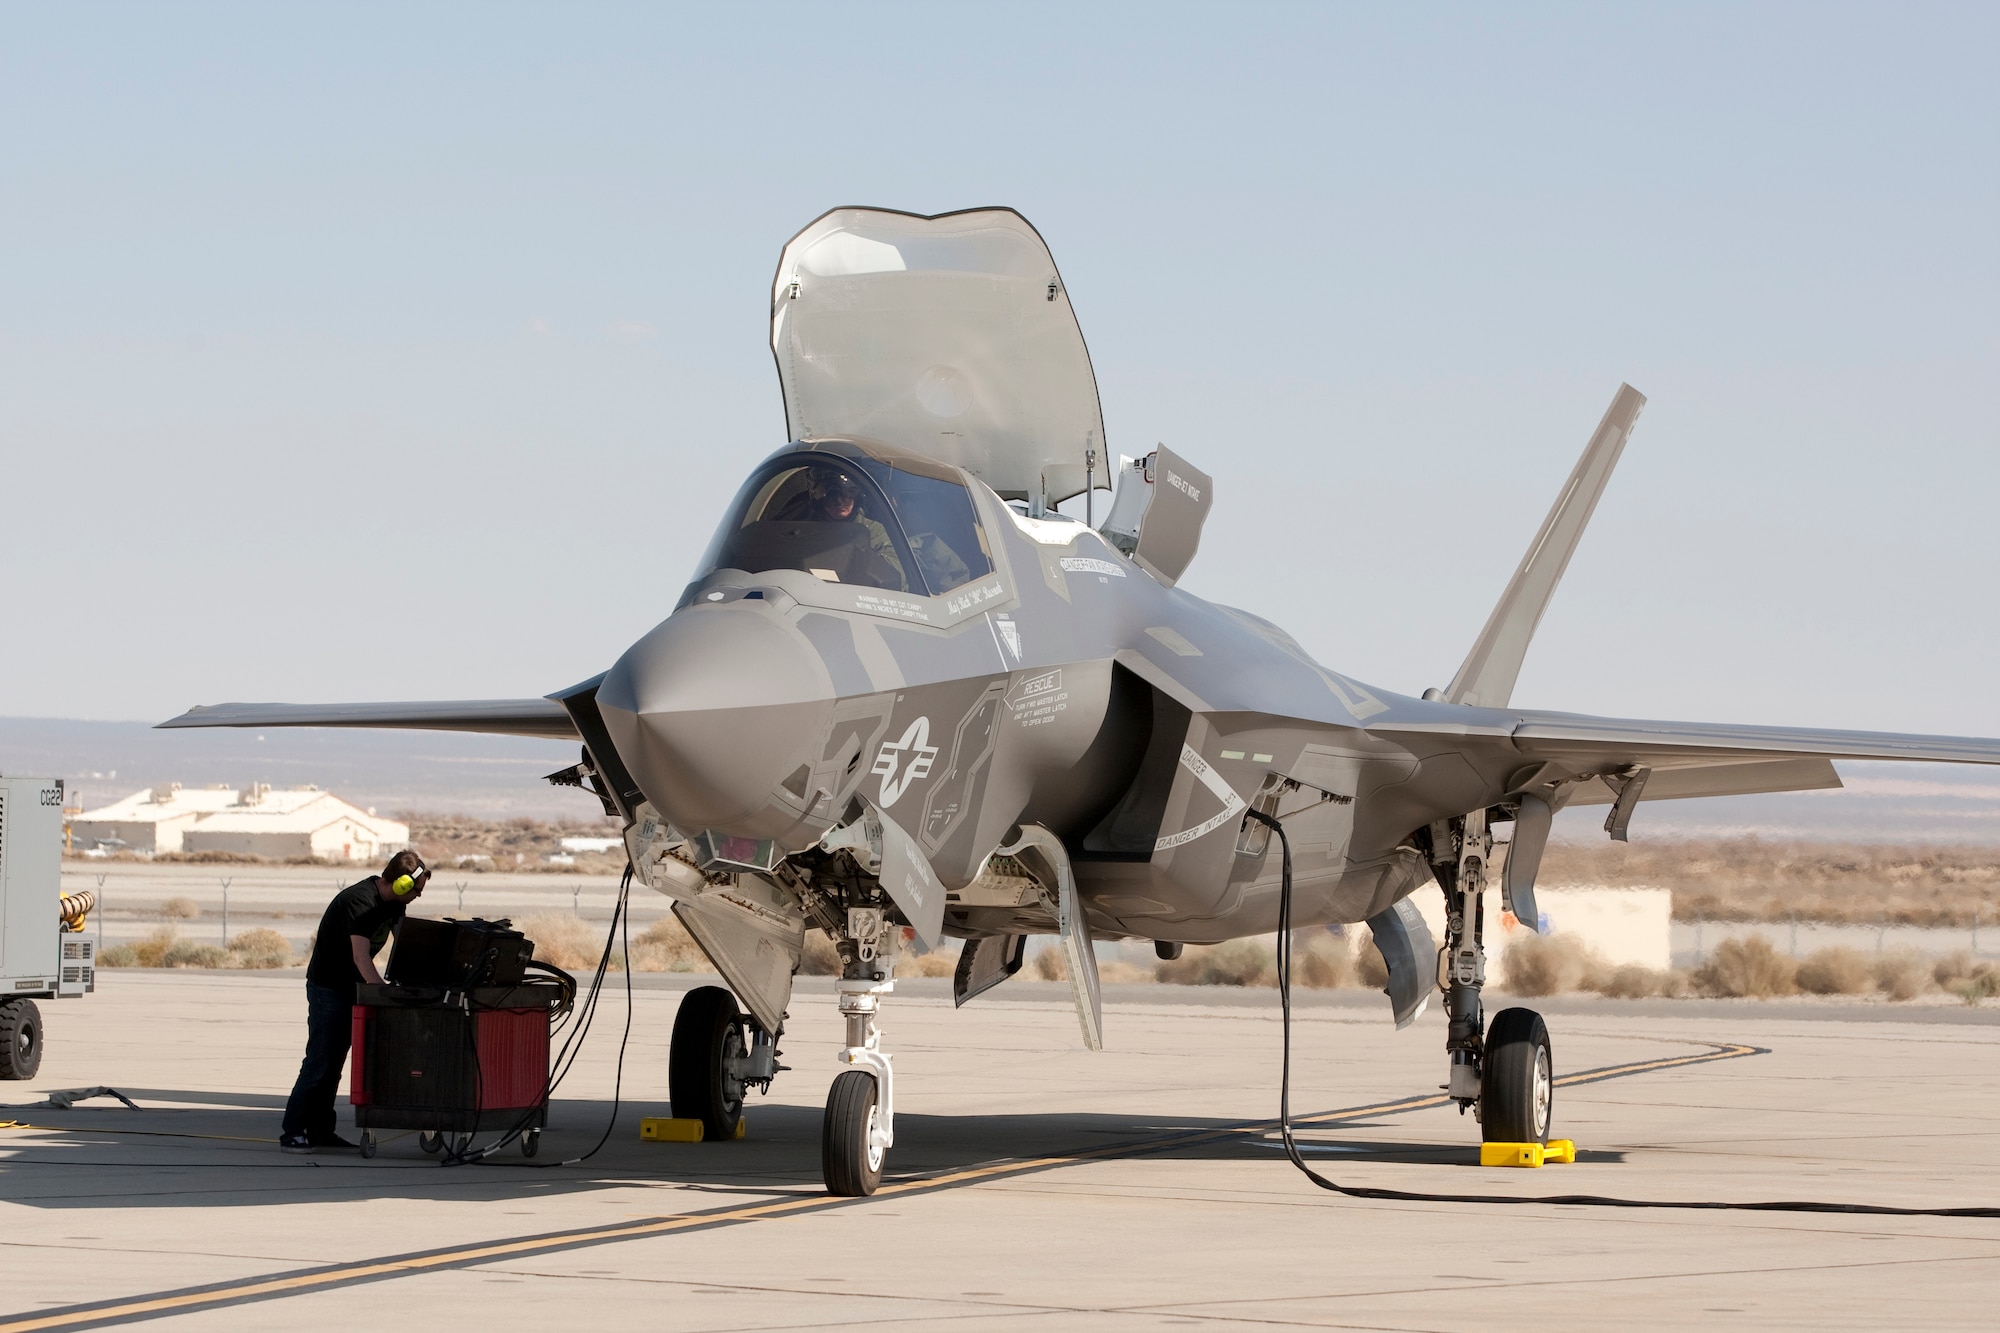 BF-17 arrival at Edwards Air Force Base March 5.  The F-35B is the short takeoff and vertical landing (STOVL) variant of the F-35 Lightning II and is operated by the Marine Corps. It's the first mission systems B-variant to arrive at Edwards.  (Photo by Tom Reynolds/Lockheed Martin)